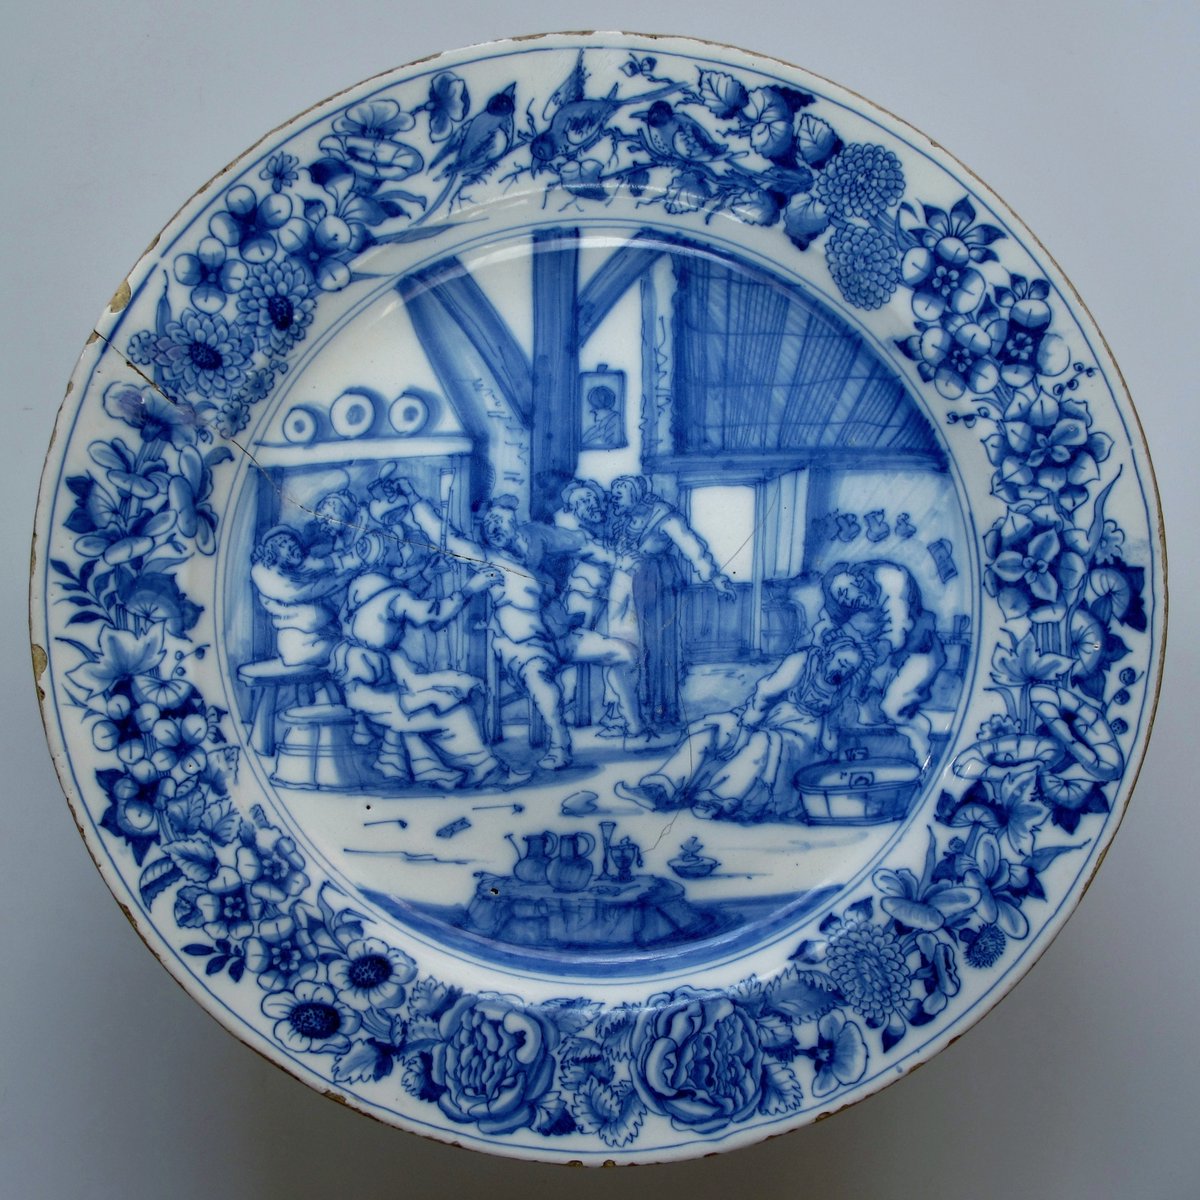 @PP_Rubens And here, his portrait, even hanging on the wall of a #tavern, Can you spot him? #Suleiman the magnificent. This is a very rare Haarlem #delftware charger, 1650, C.EvD. #rijksmuseum #goldenage #faience #tinglaze #pottery #potter #China #porcealin.